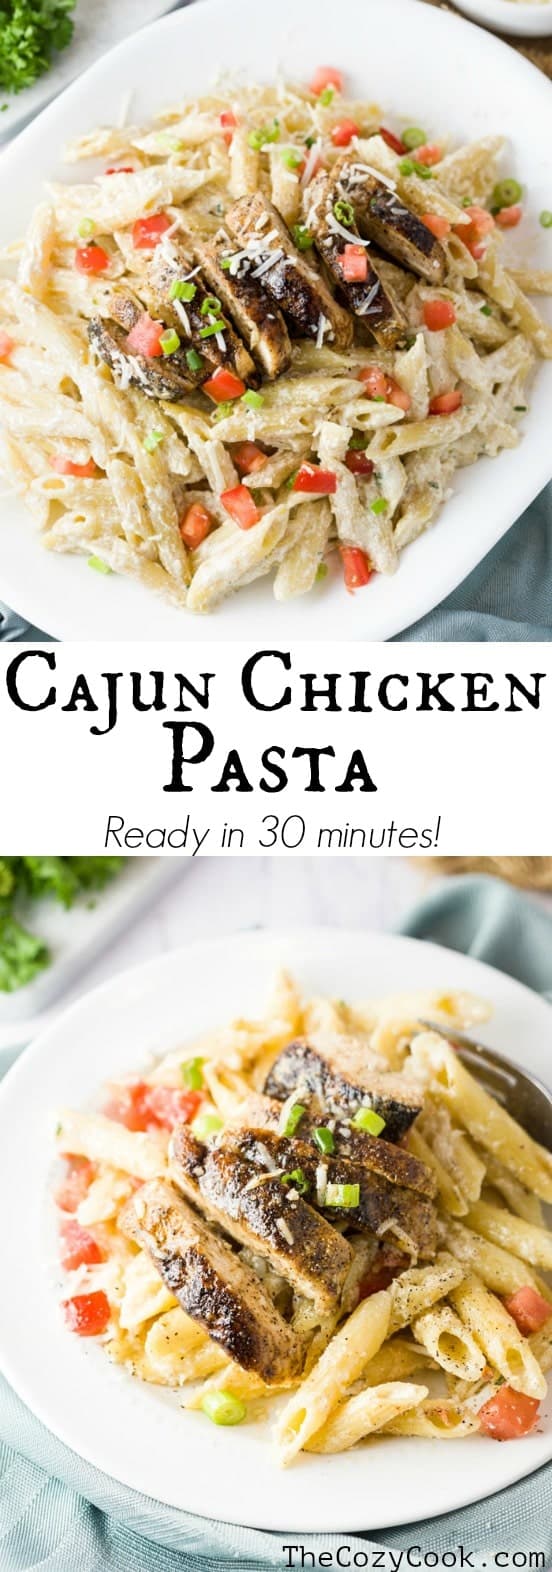 This Cajun chicken pasta recipe takes just 30 minutes to make! Just like the Chili's version, it's loaded with perfectly cooked Penne that's smothered in a savory Parmesan cream sauce and topped with Blackened Cajun chicken and diced tomatoes. #pasta #cajun #cajunchicken #chicken #dinner #alfredo #parmesan #comfortfood #italianfood #chilis #copycat #penne